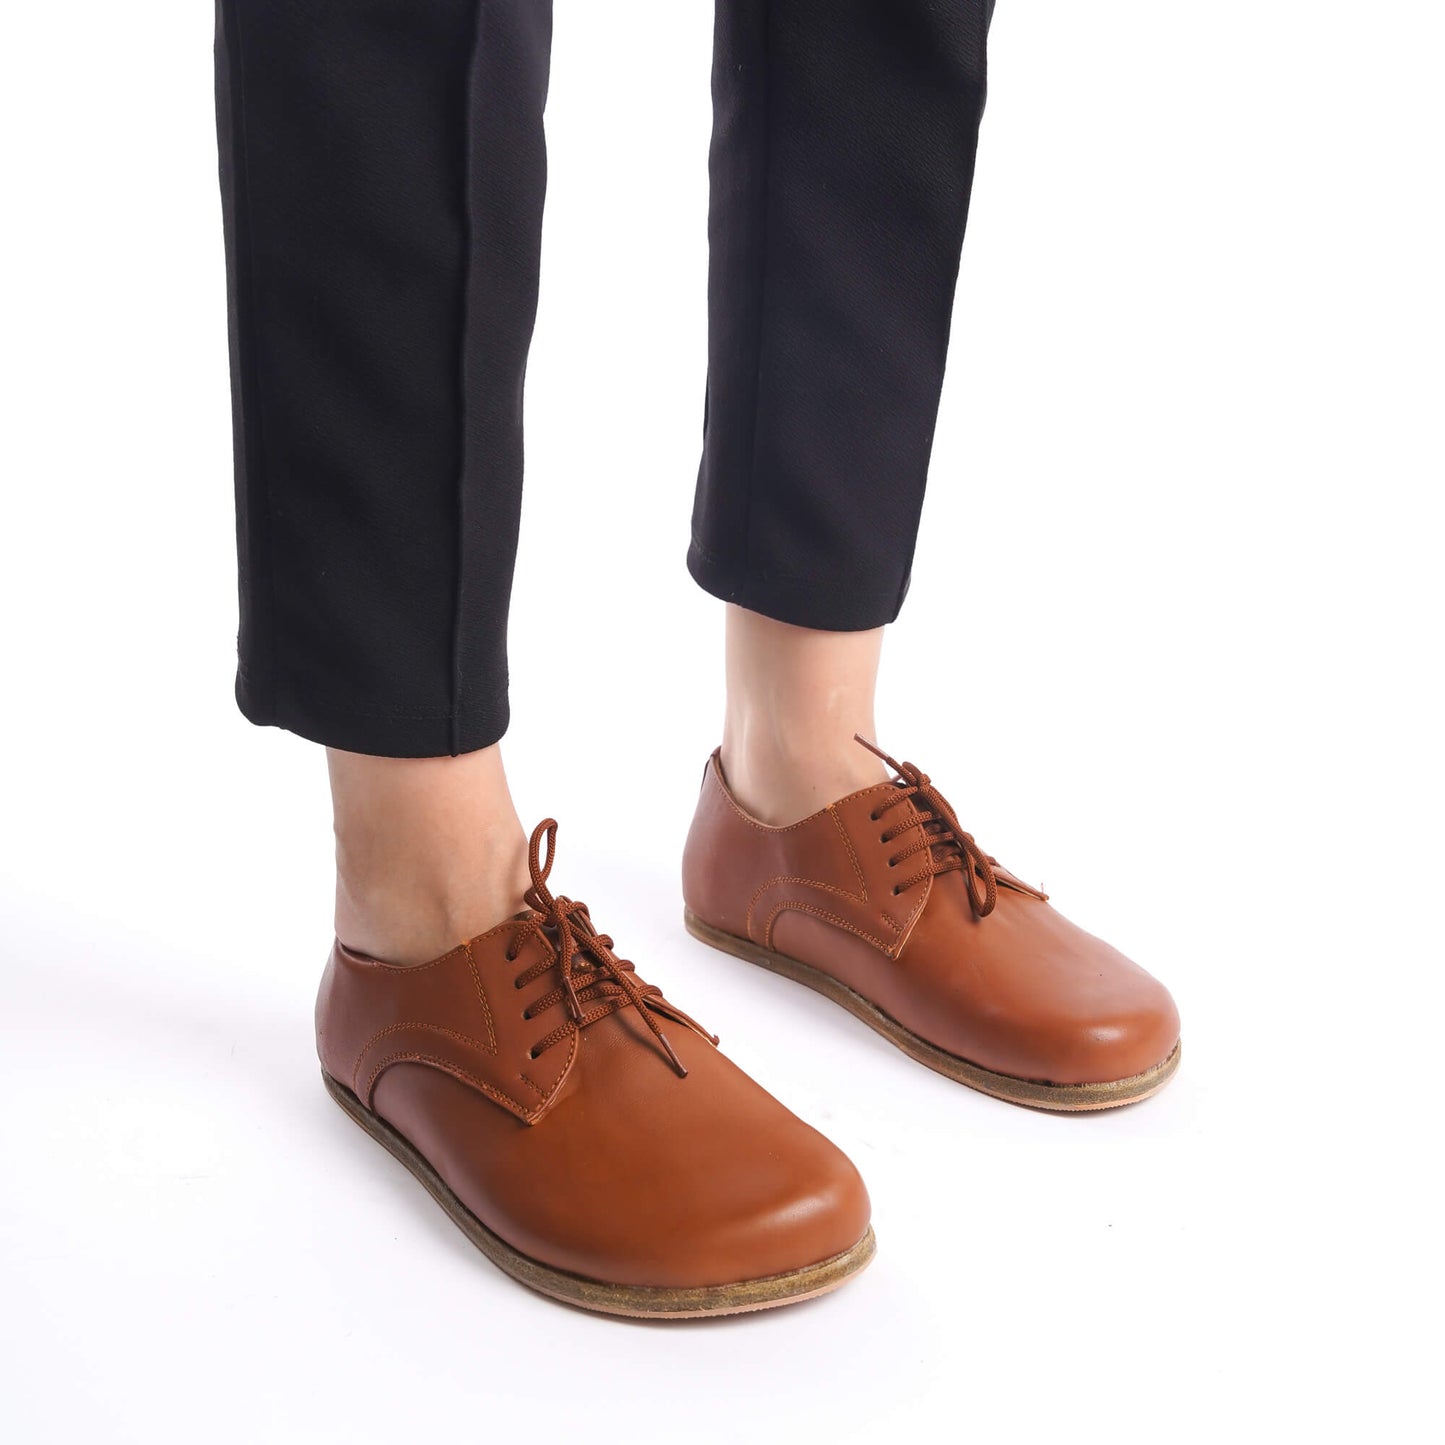 Model standing in tan brown leather barefoot women Oxfords, highlighting the shoes' sleek design and natural fit for everyday comfort.